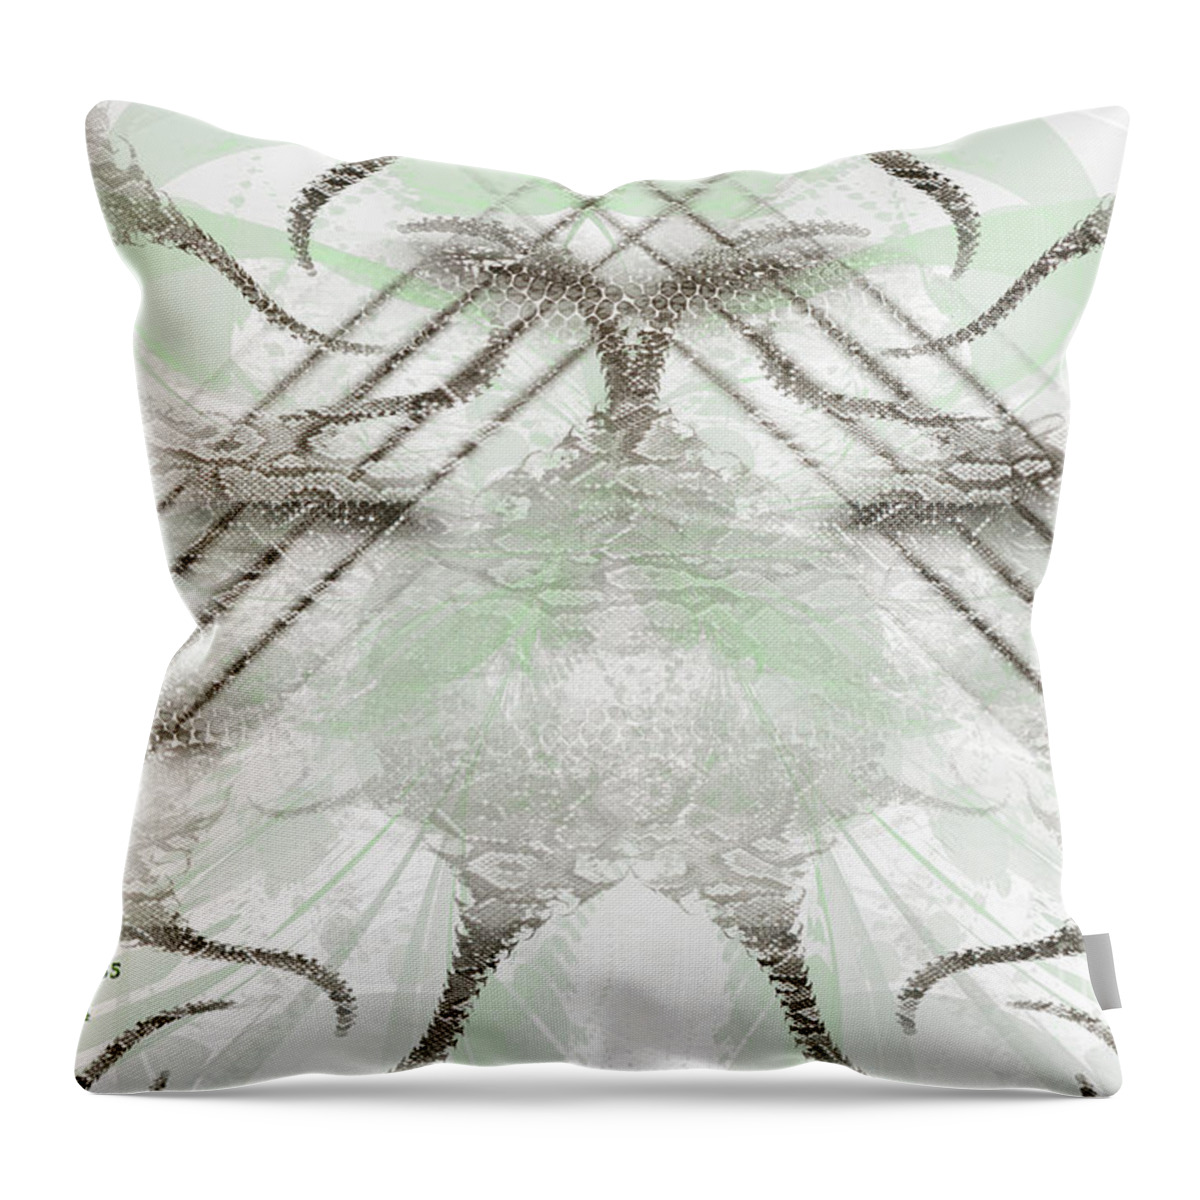 Jwildfire Throw Pillow featuring the digital art Snakes Around The World by Melissa Messick